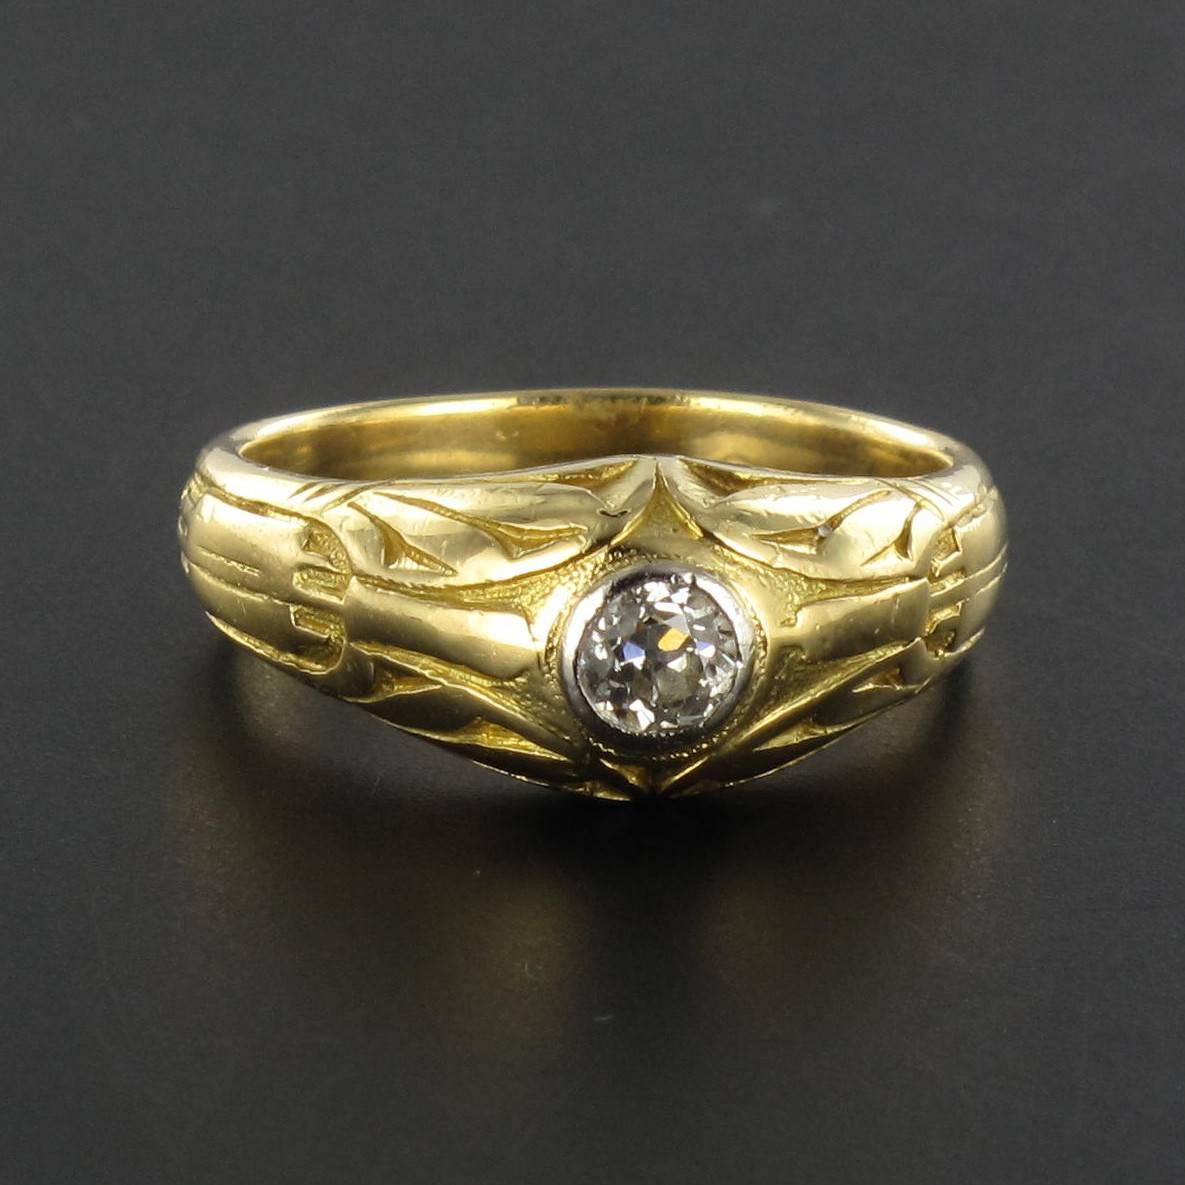 Ring in 18 carat yellow gold. 

A men’s gold signet ring, featuring a bezel set antique brilliant cut diamond of excellent quality set in white gold. The ring band is engraved over half of its surface with geometric forms around the central